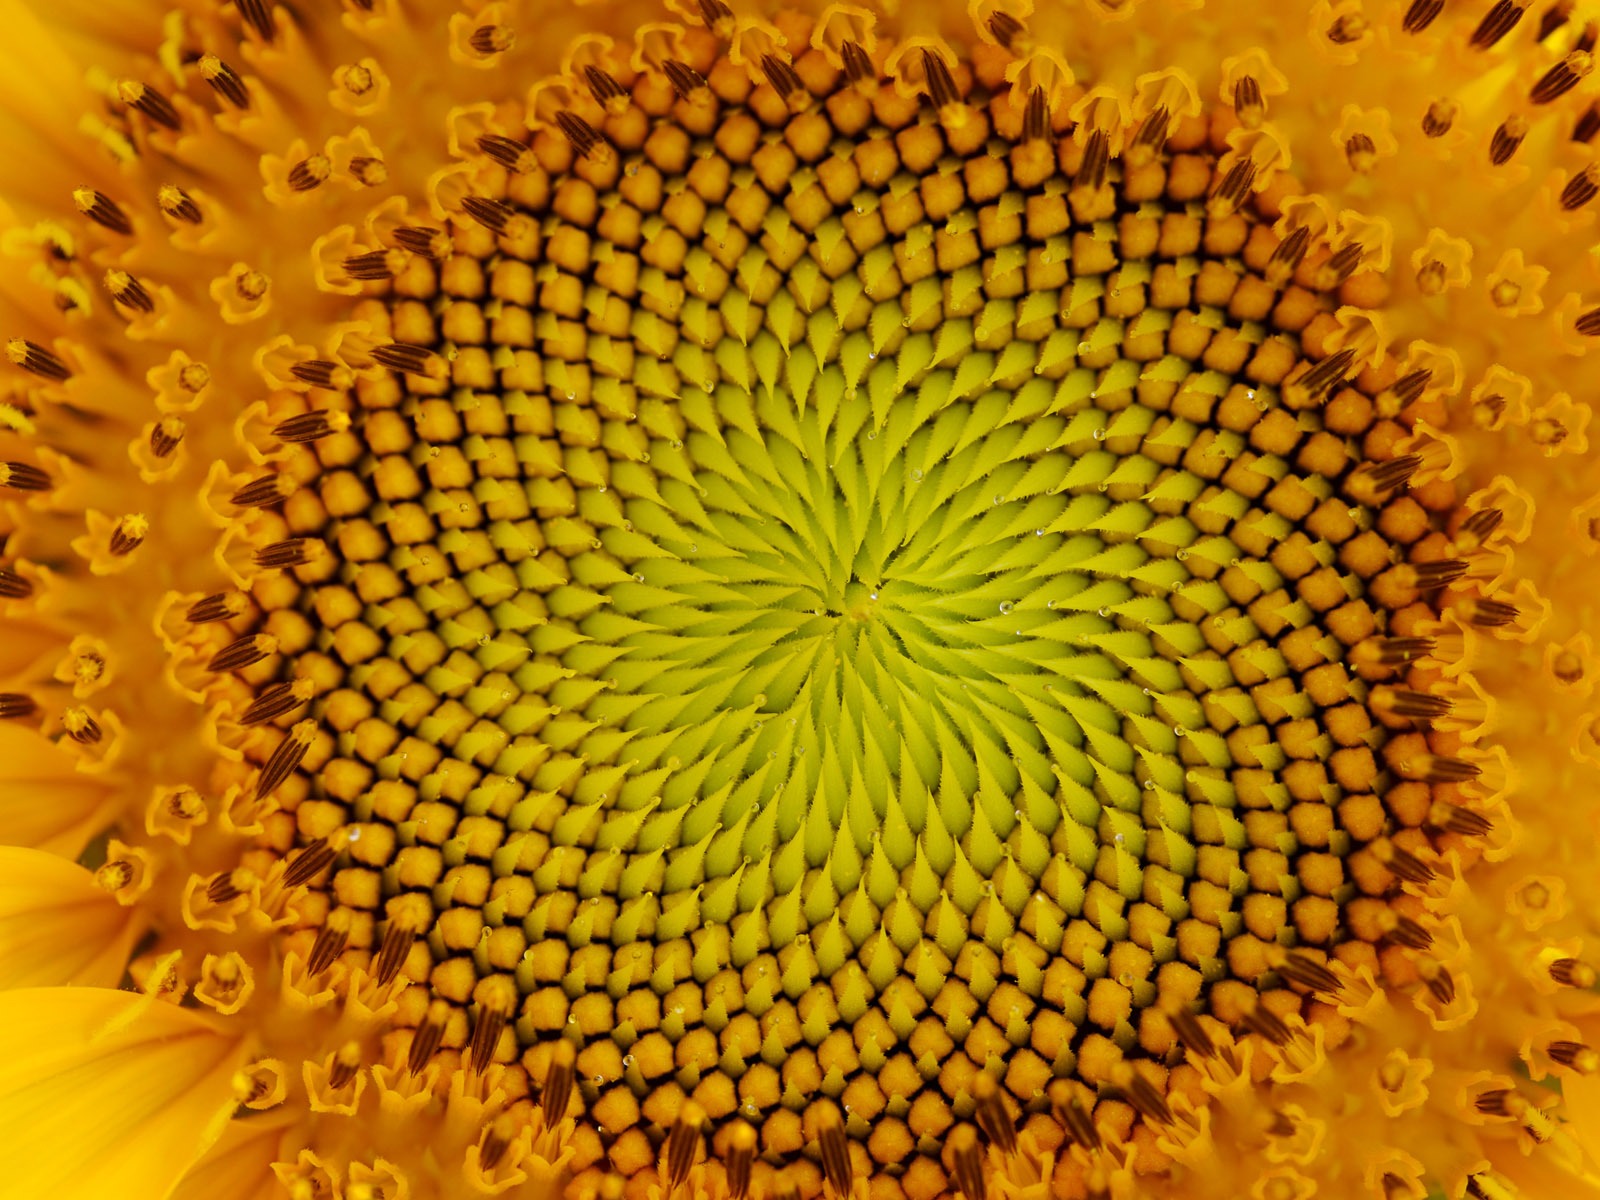 Sunny sunflower photo HD Wallpapers #30 - 1600x1200